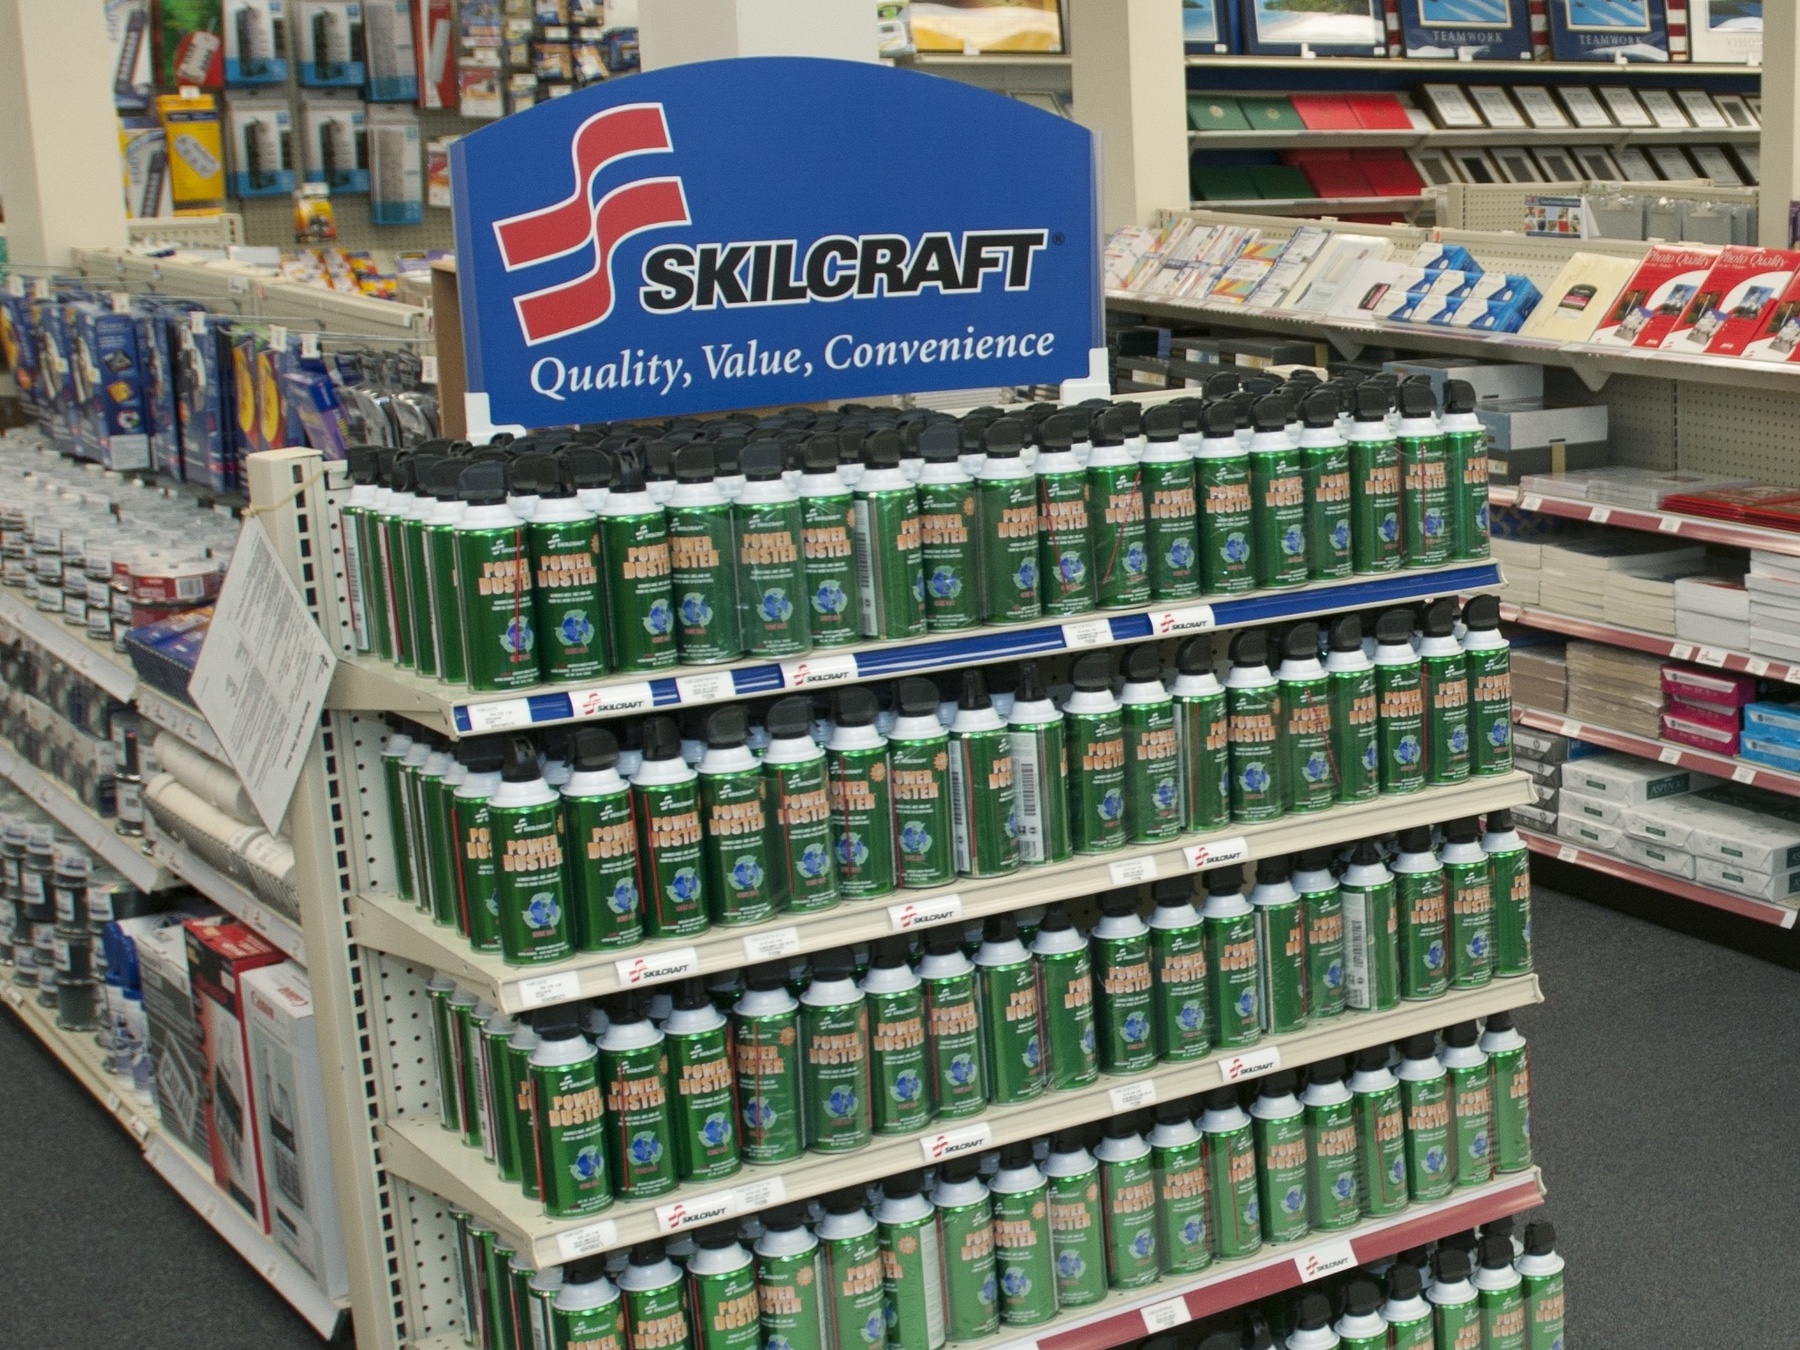 An endcap aisle displaying SkillCraft products